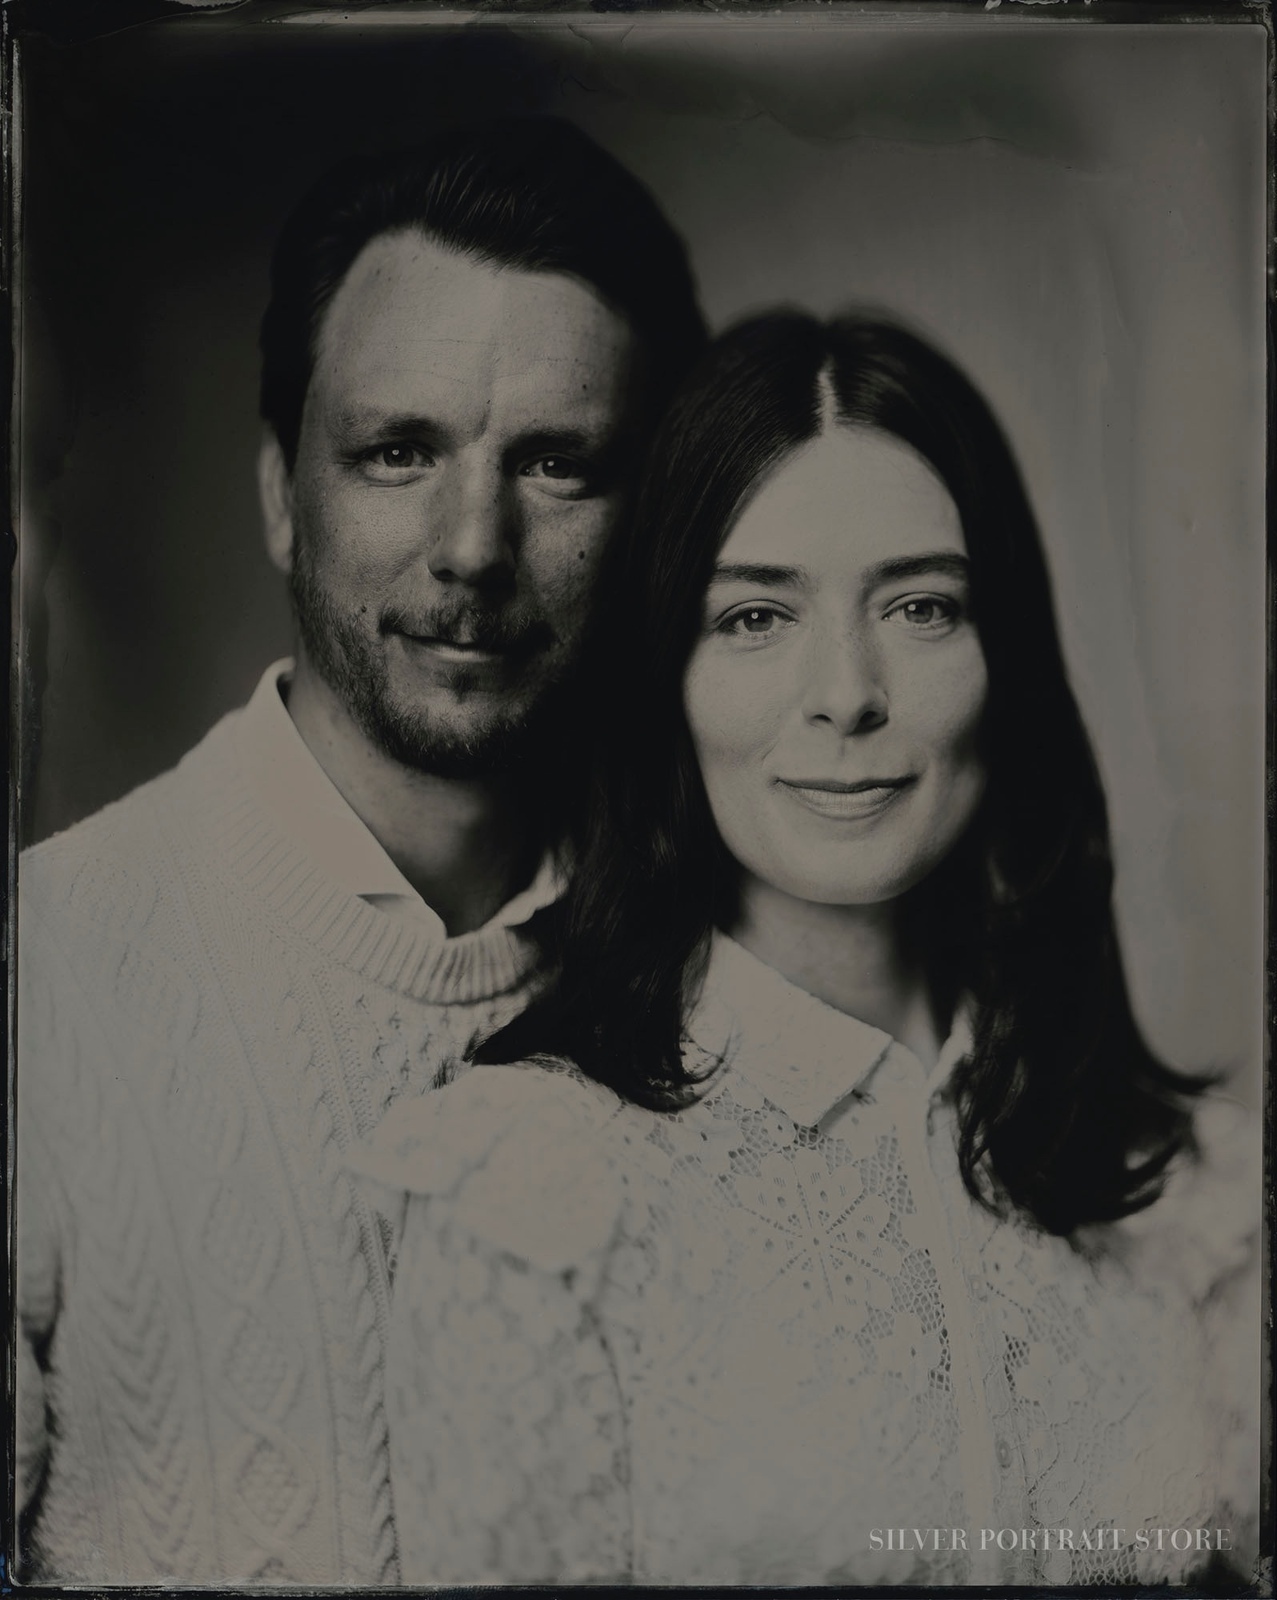 Adel & Ede-Silver Portrait Store-Wet plate collodion-Tintype 20 x 25 cm.